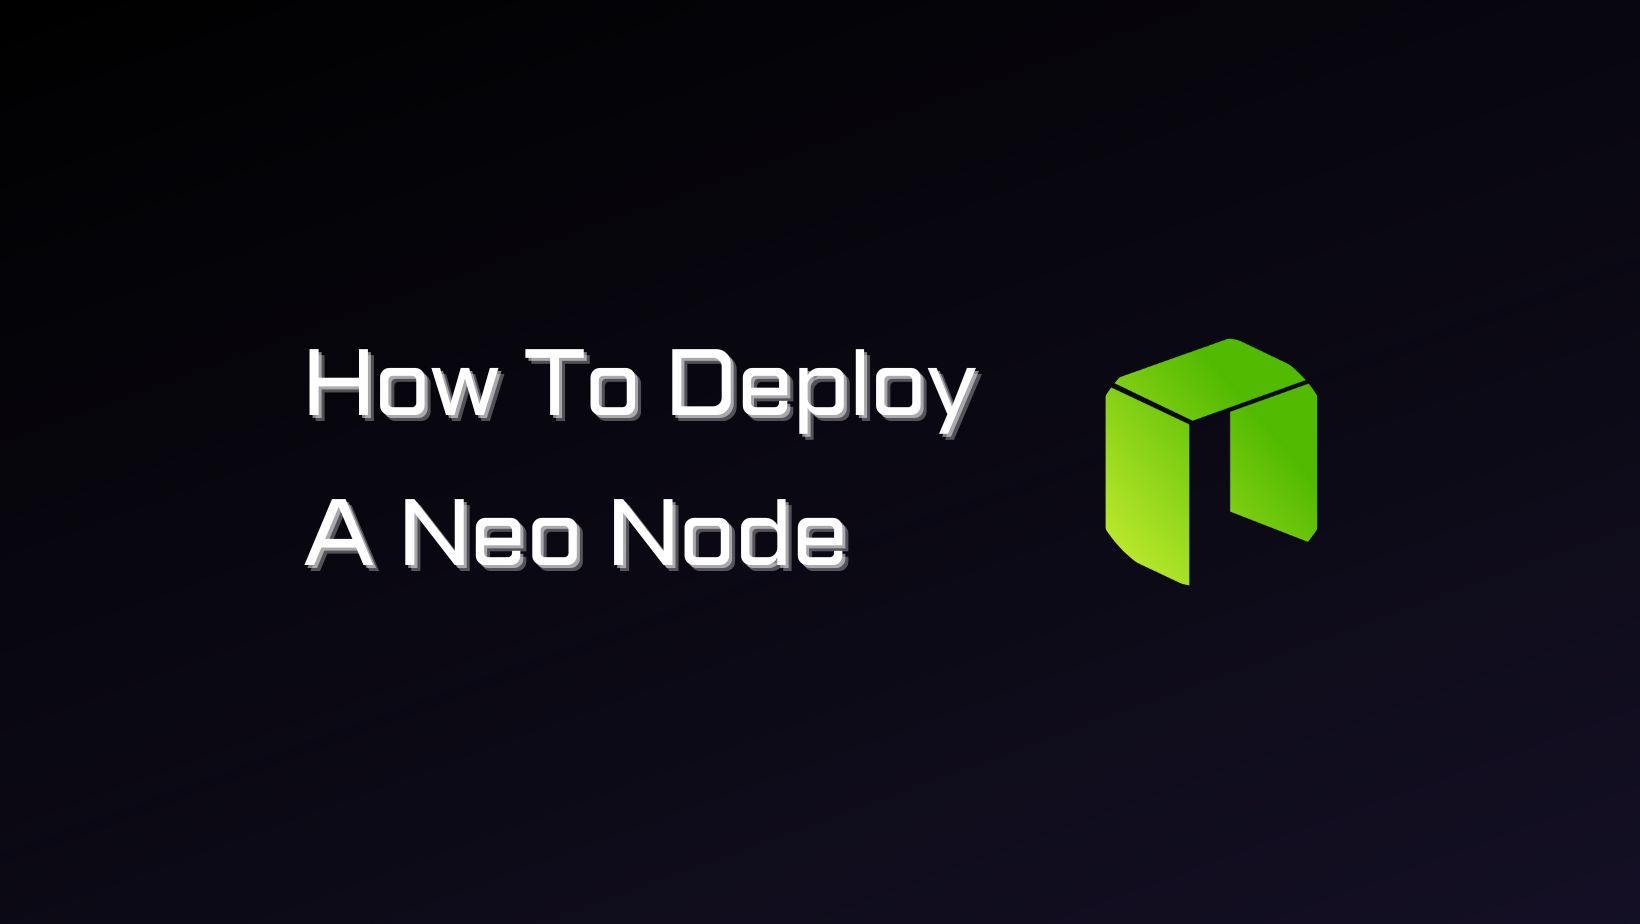 How to Deploy a Neo Node